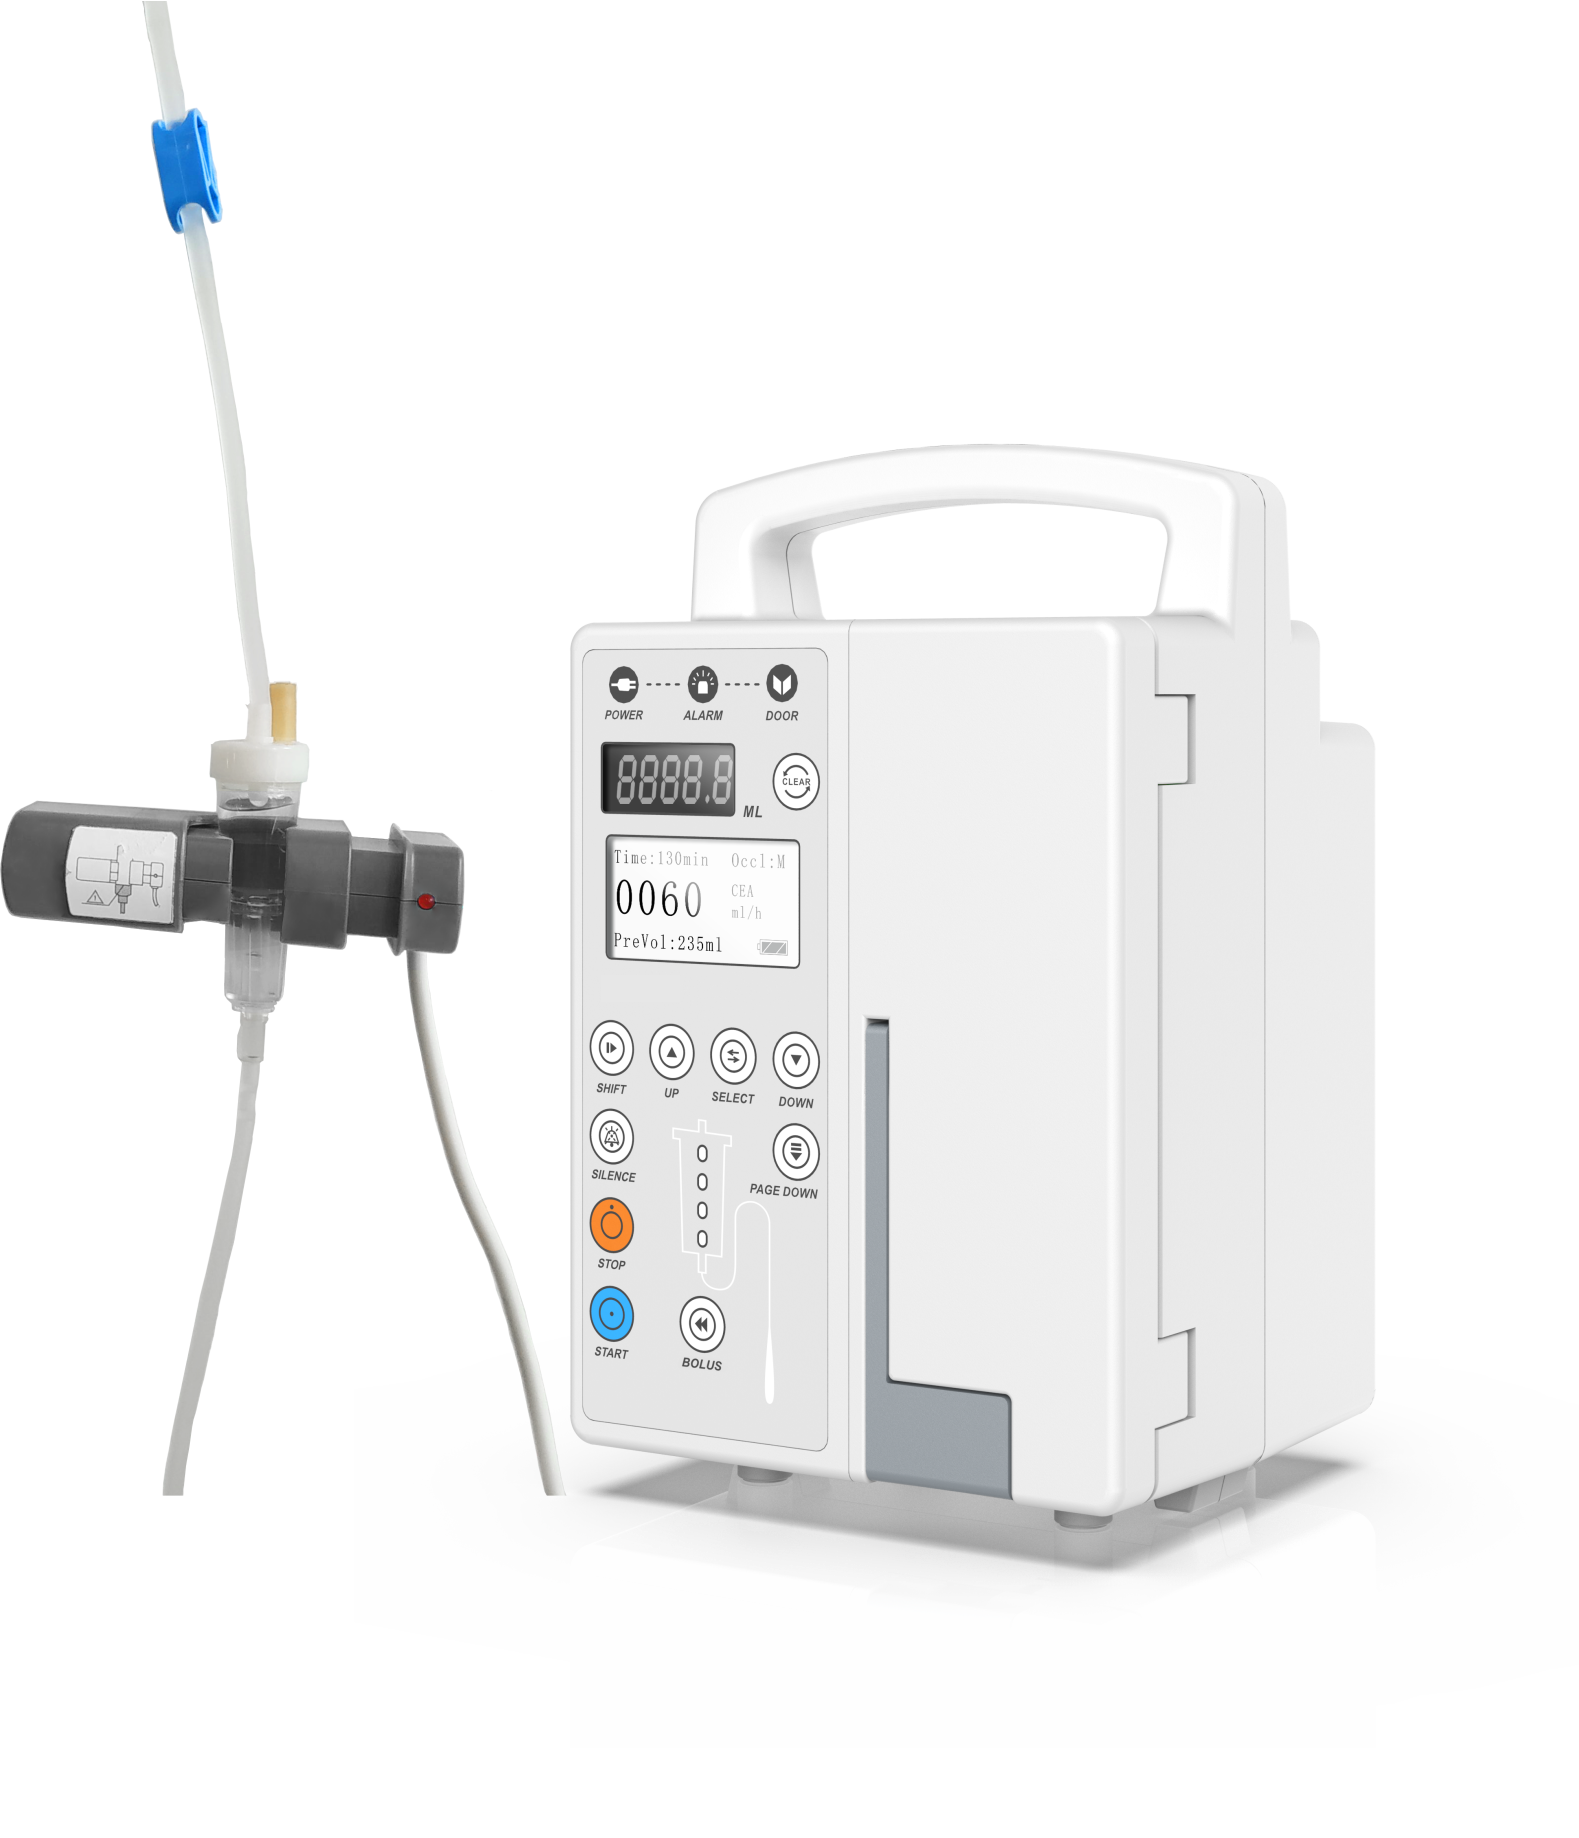 Cheap new medical Portable IV syringe pump and infusion pump in hospital ICU CCU